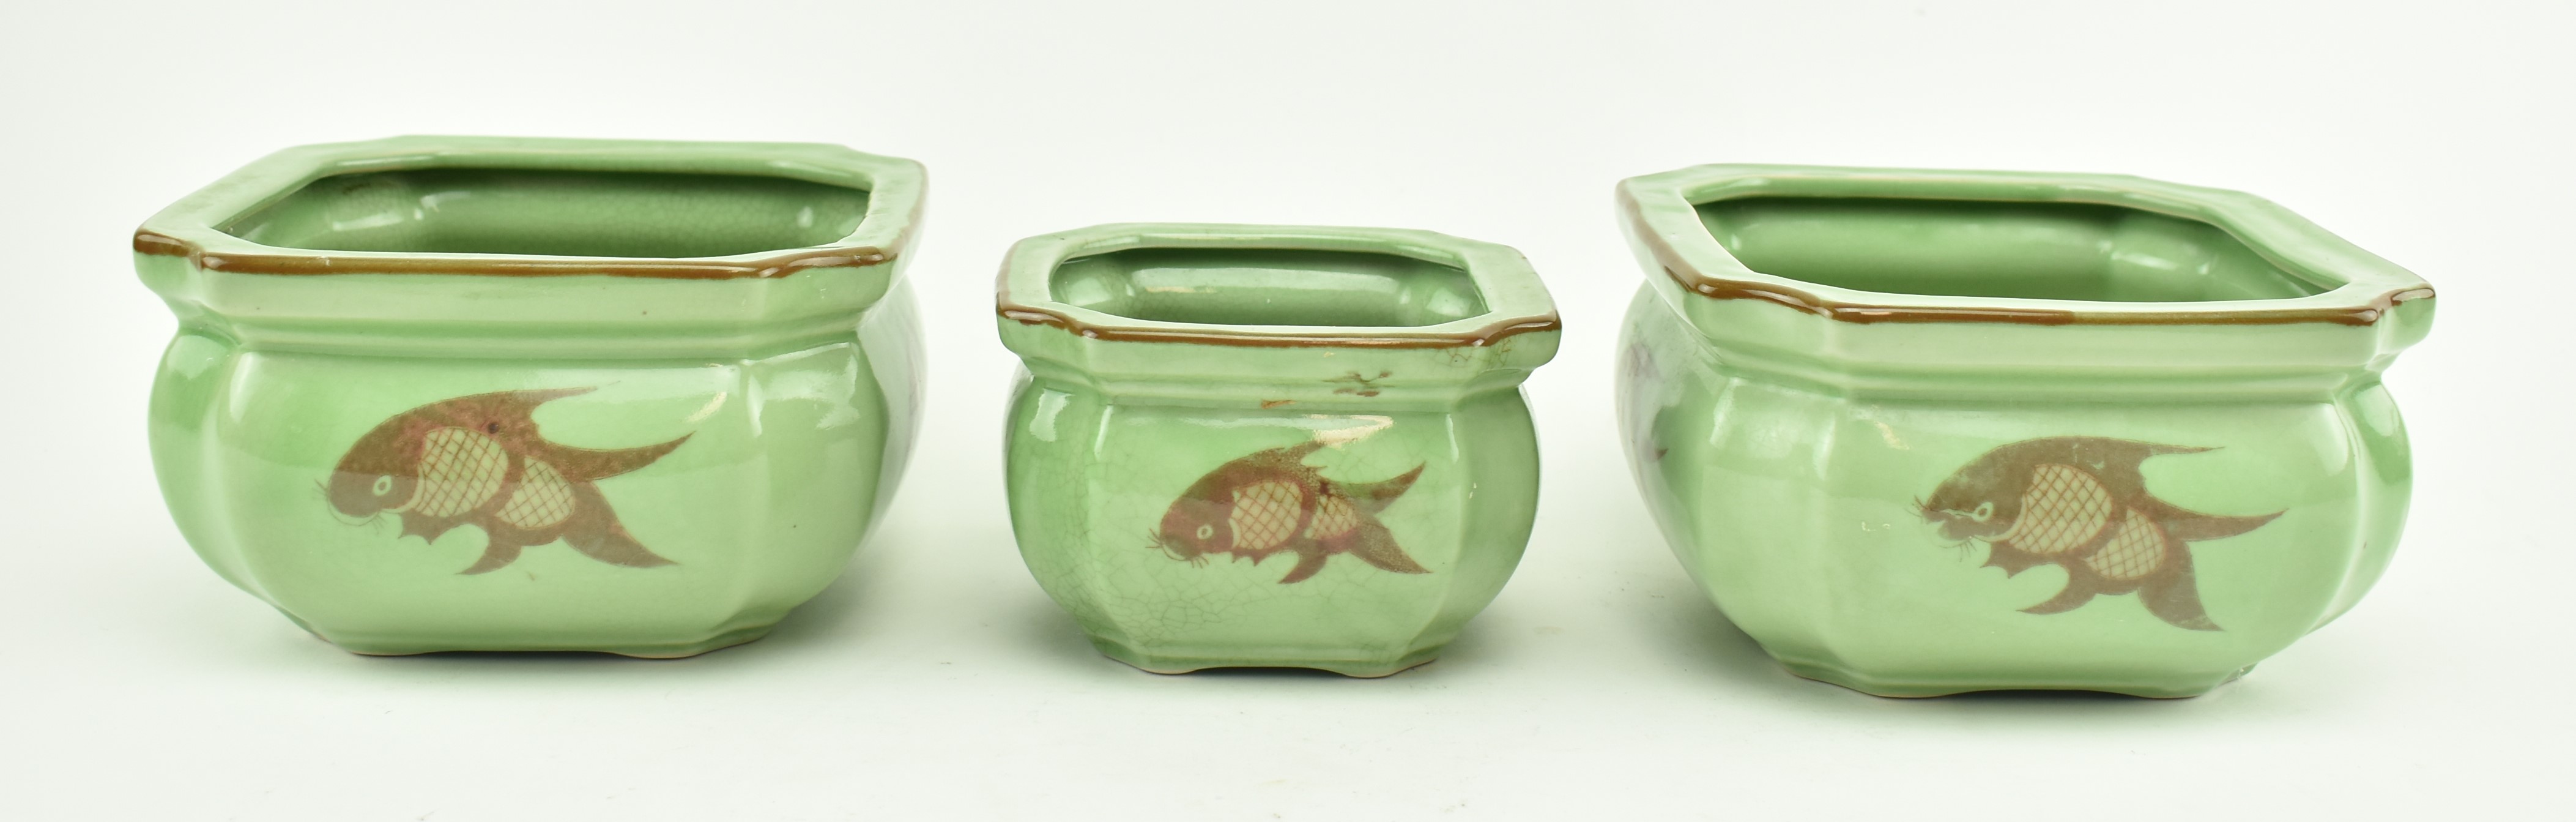 COLLECTION OF THREE CHINESE CRACKLE CERAMIC KOI FISH POTS - Image 4 of 6